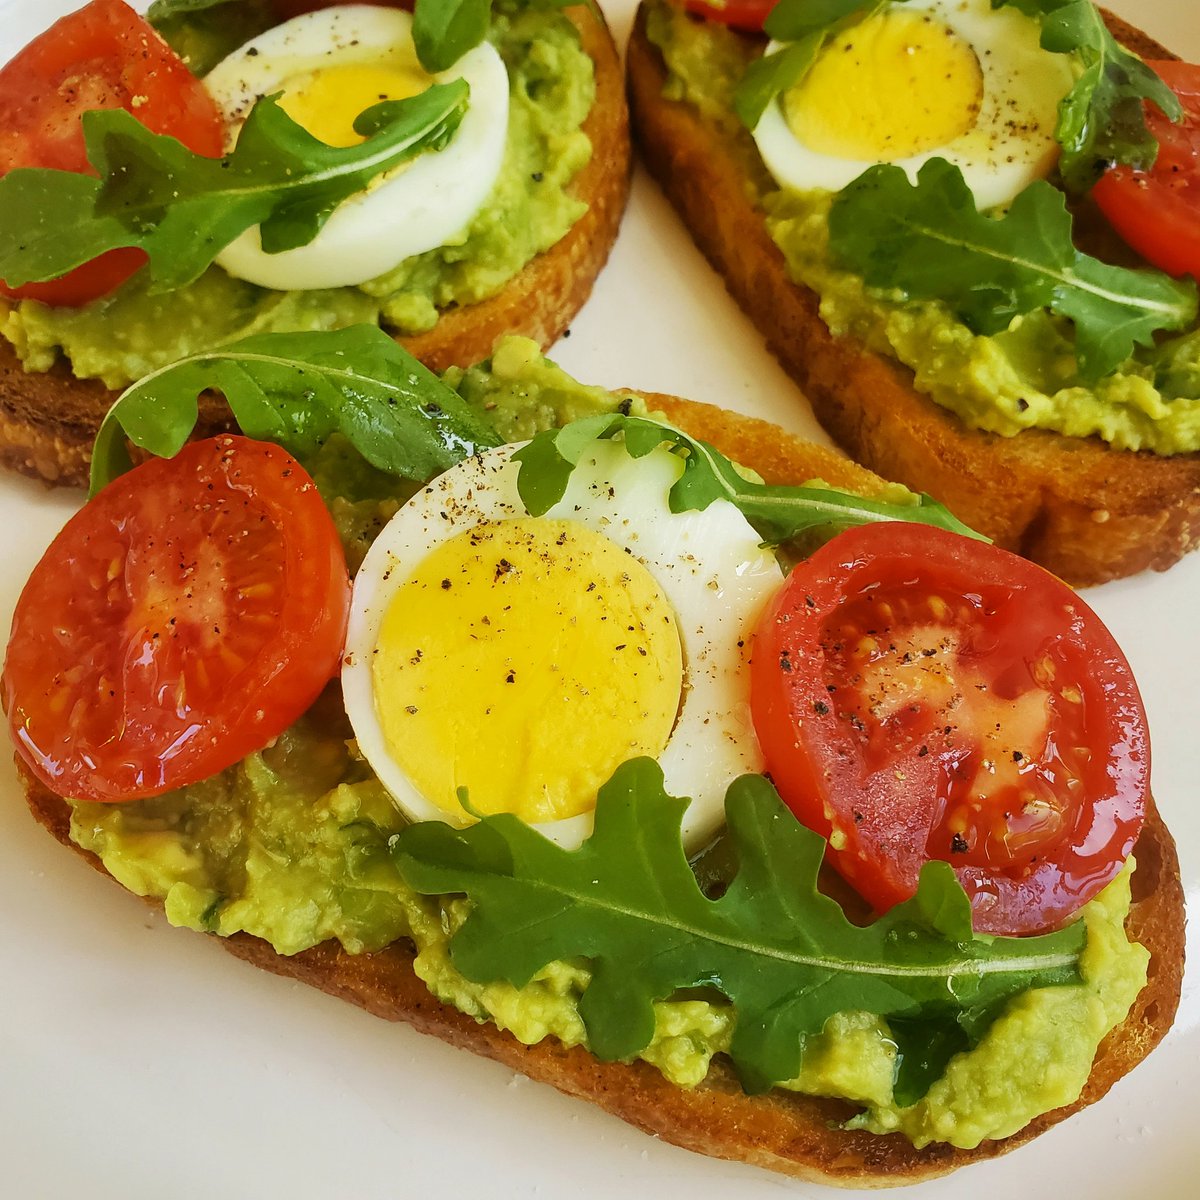 Who wants toast with guacamole, eggs, tomatoes, and arugula?
#food #cooking #baking #foodpoll